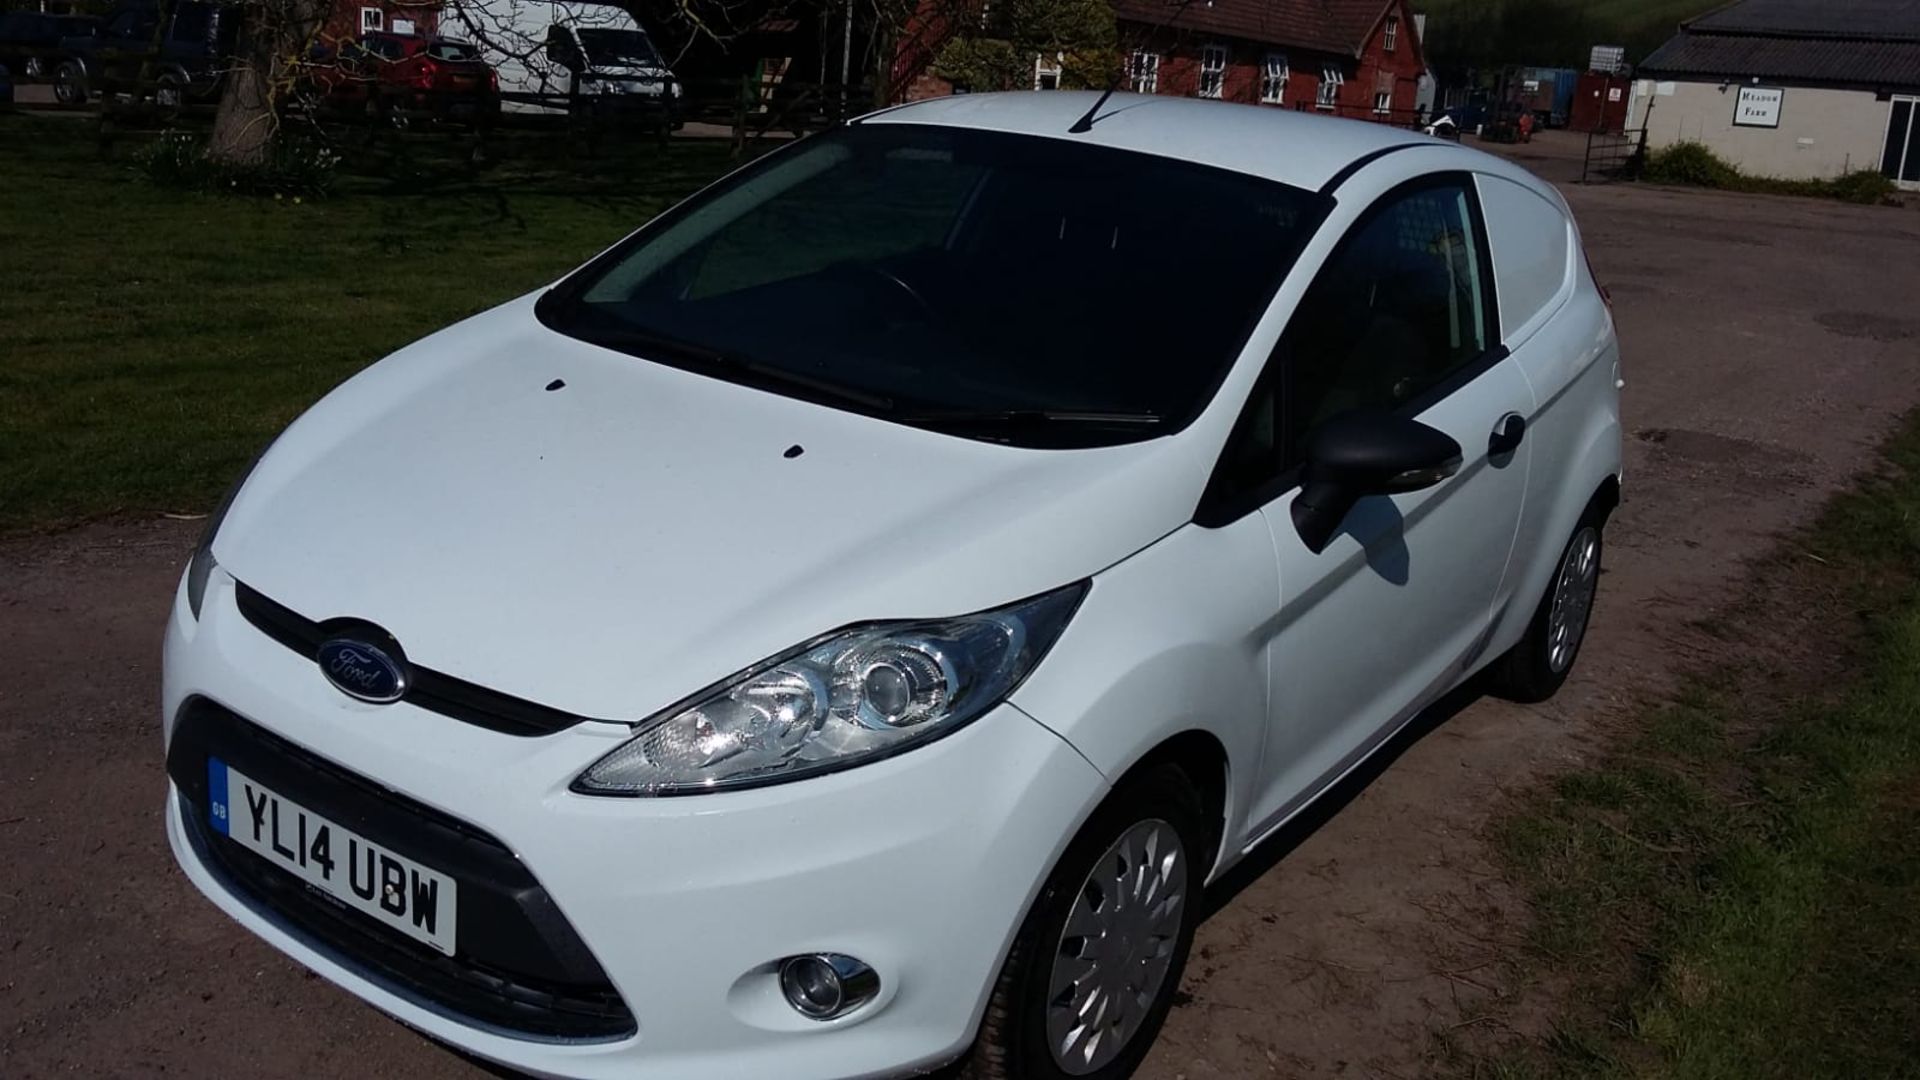 2014/14 REG FORD FIESTA ECONETIC TECH TDCI 1.6 CAR DERIVED VAN, SHOWING 0 FORMER KEEPERS *NO VAT* - Image 2 of 6